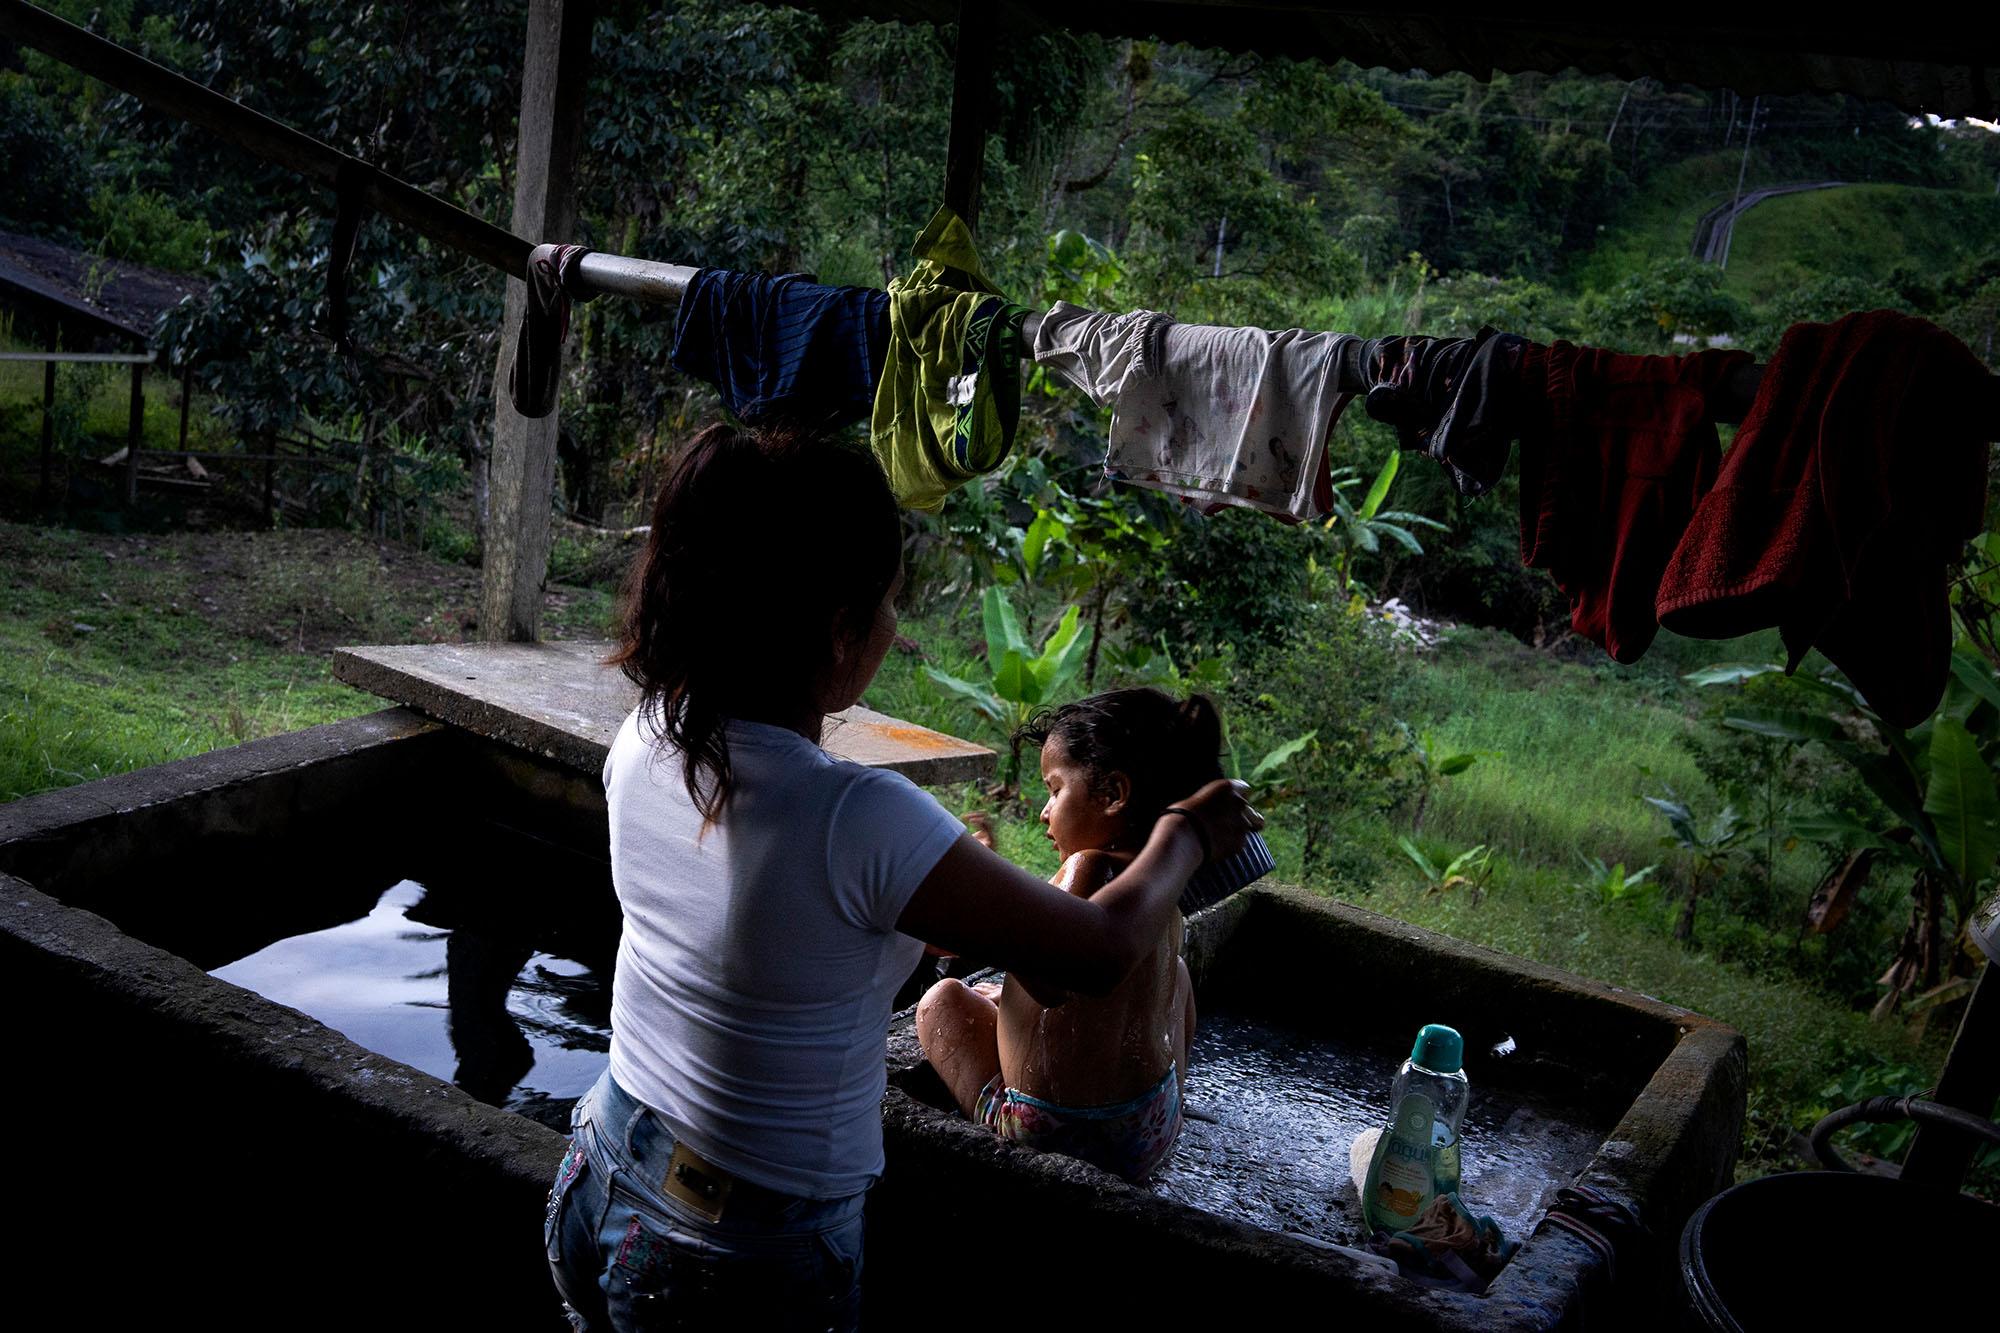 A mother bathes her daughter on the afternoon of April 28, 2021. Families in the community of San...